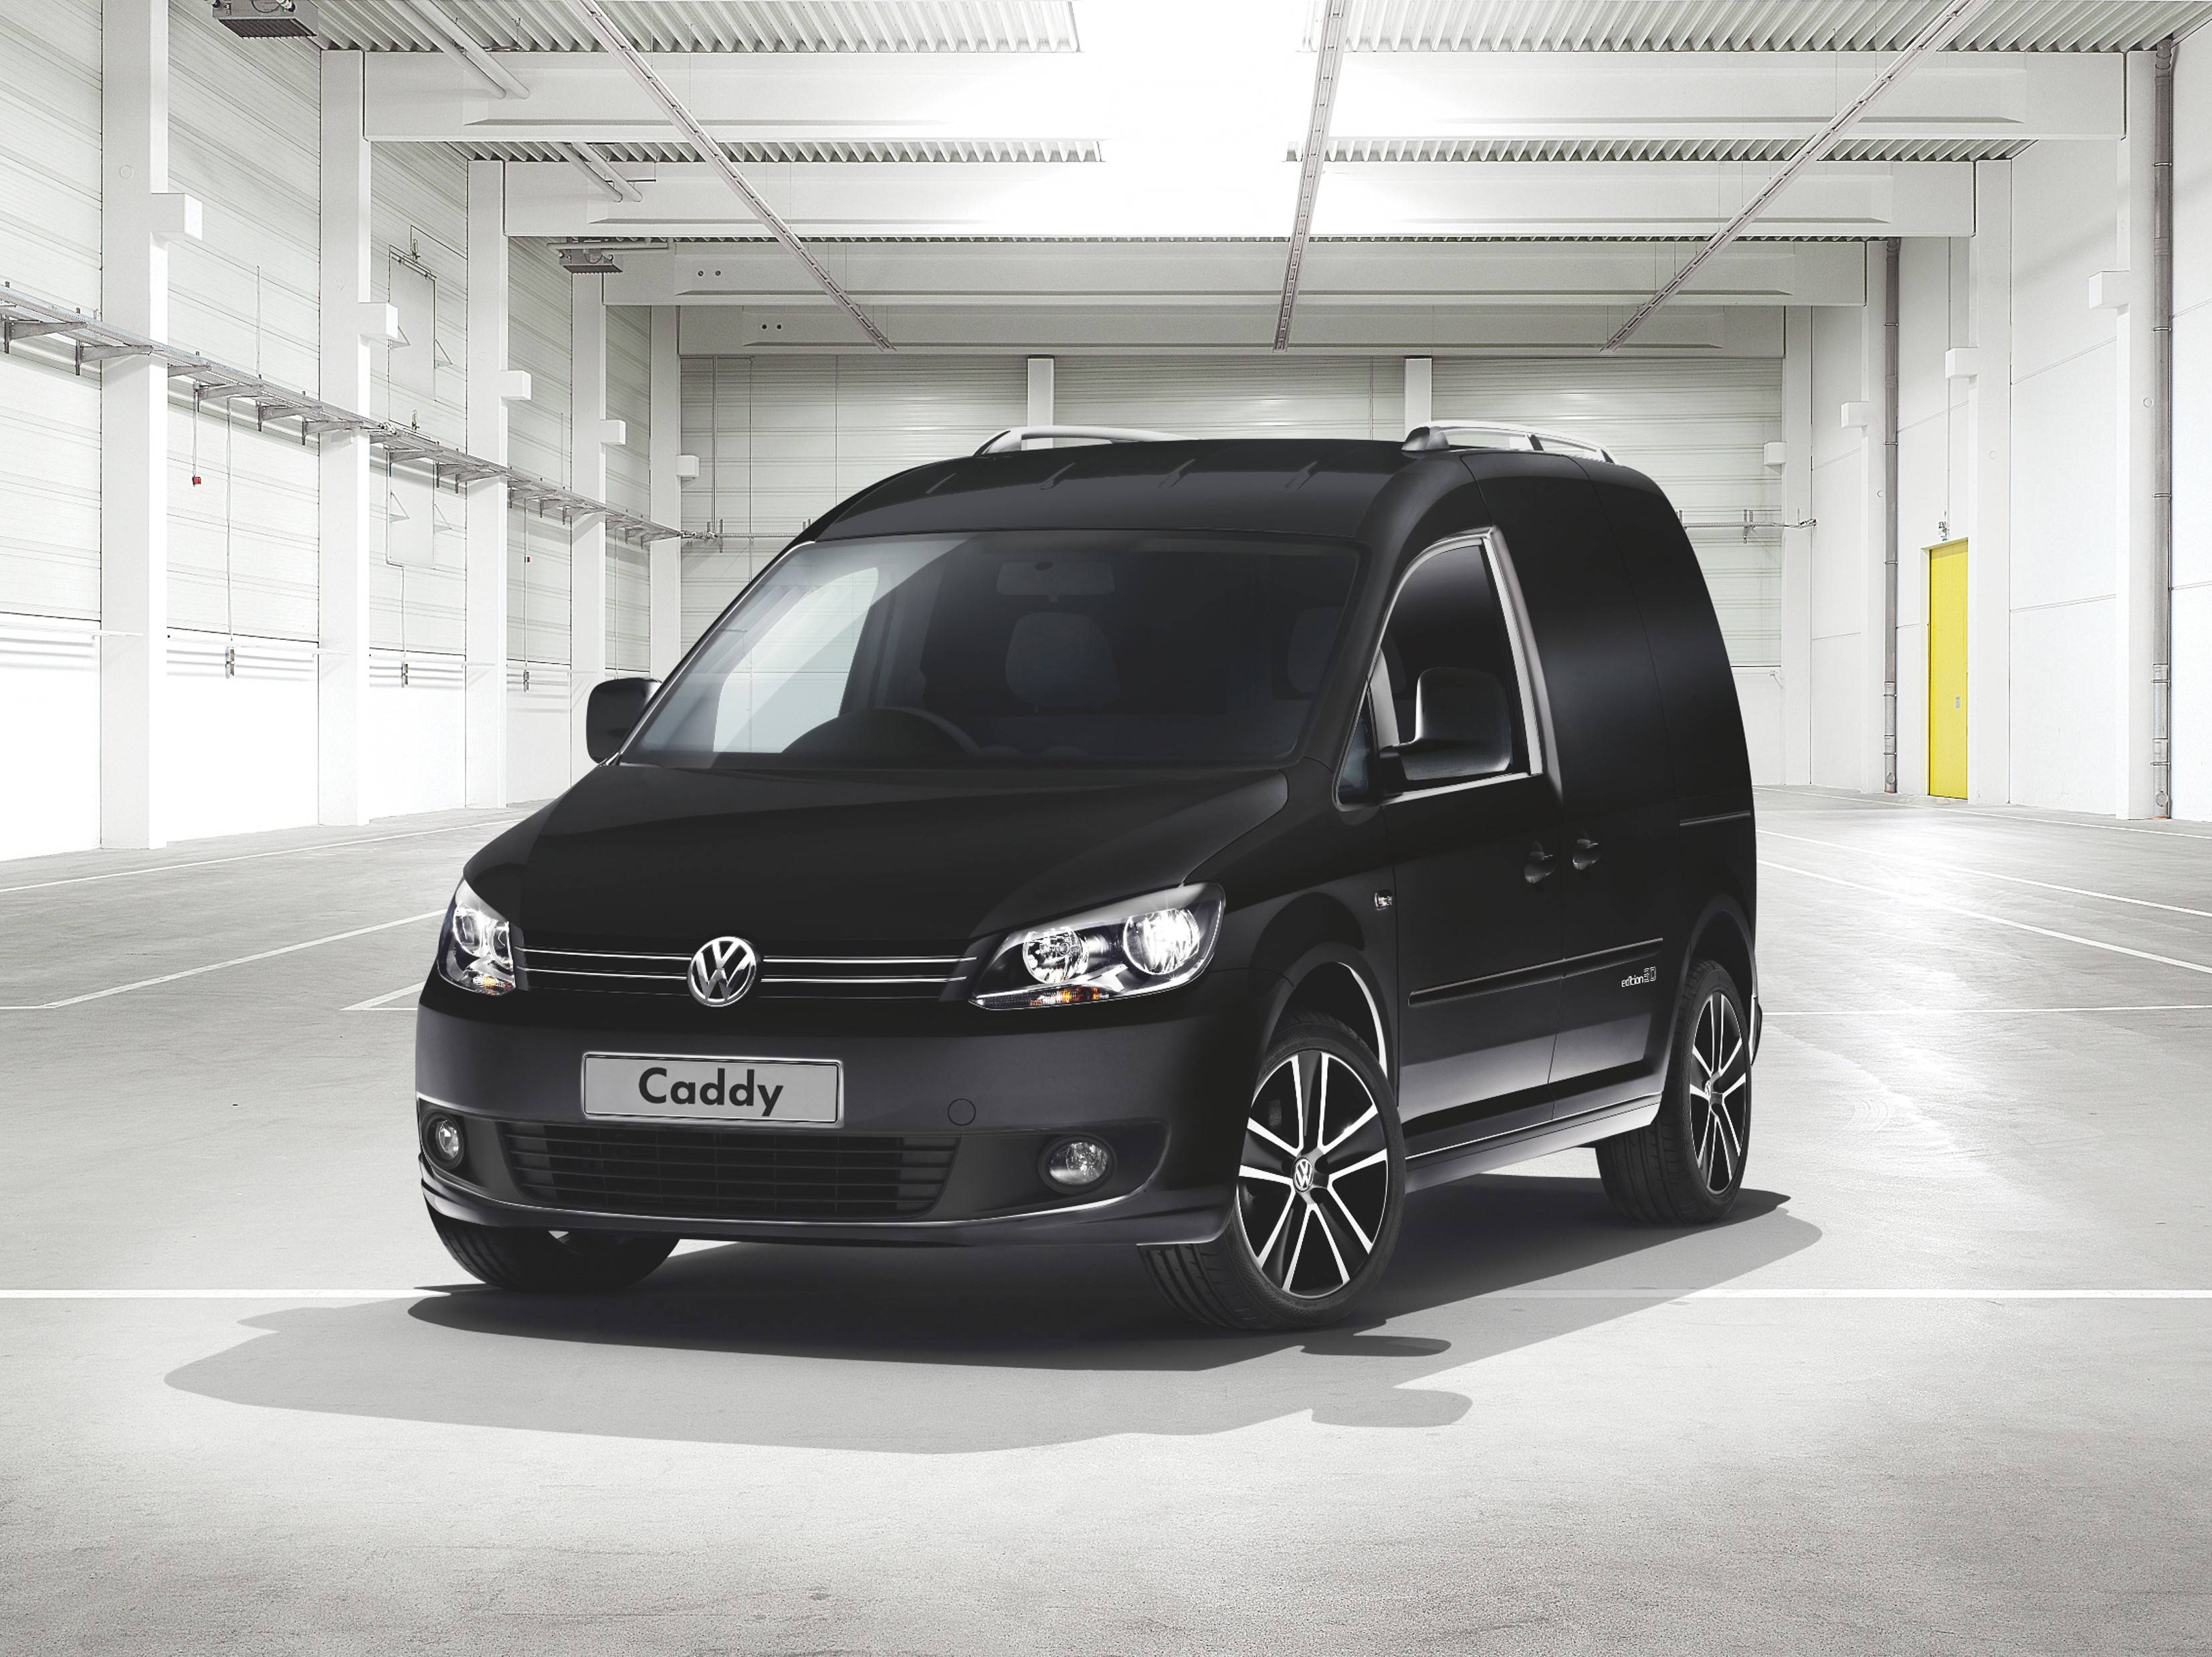 VW Caddy unveiled 